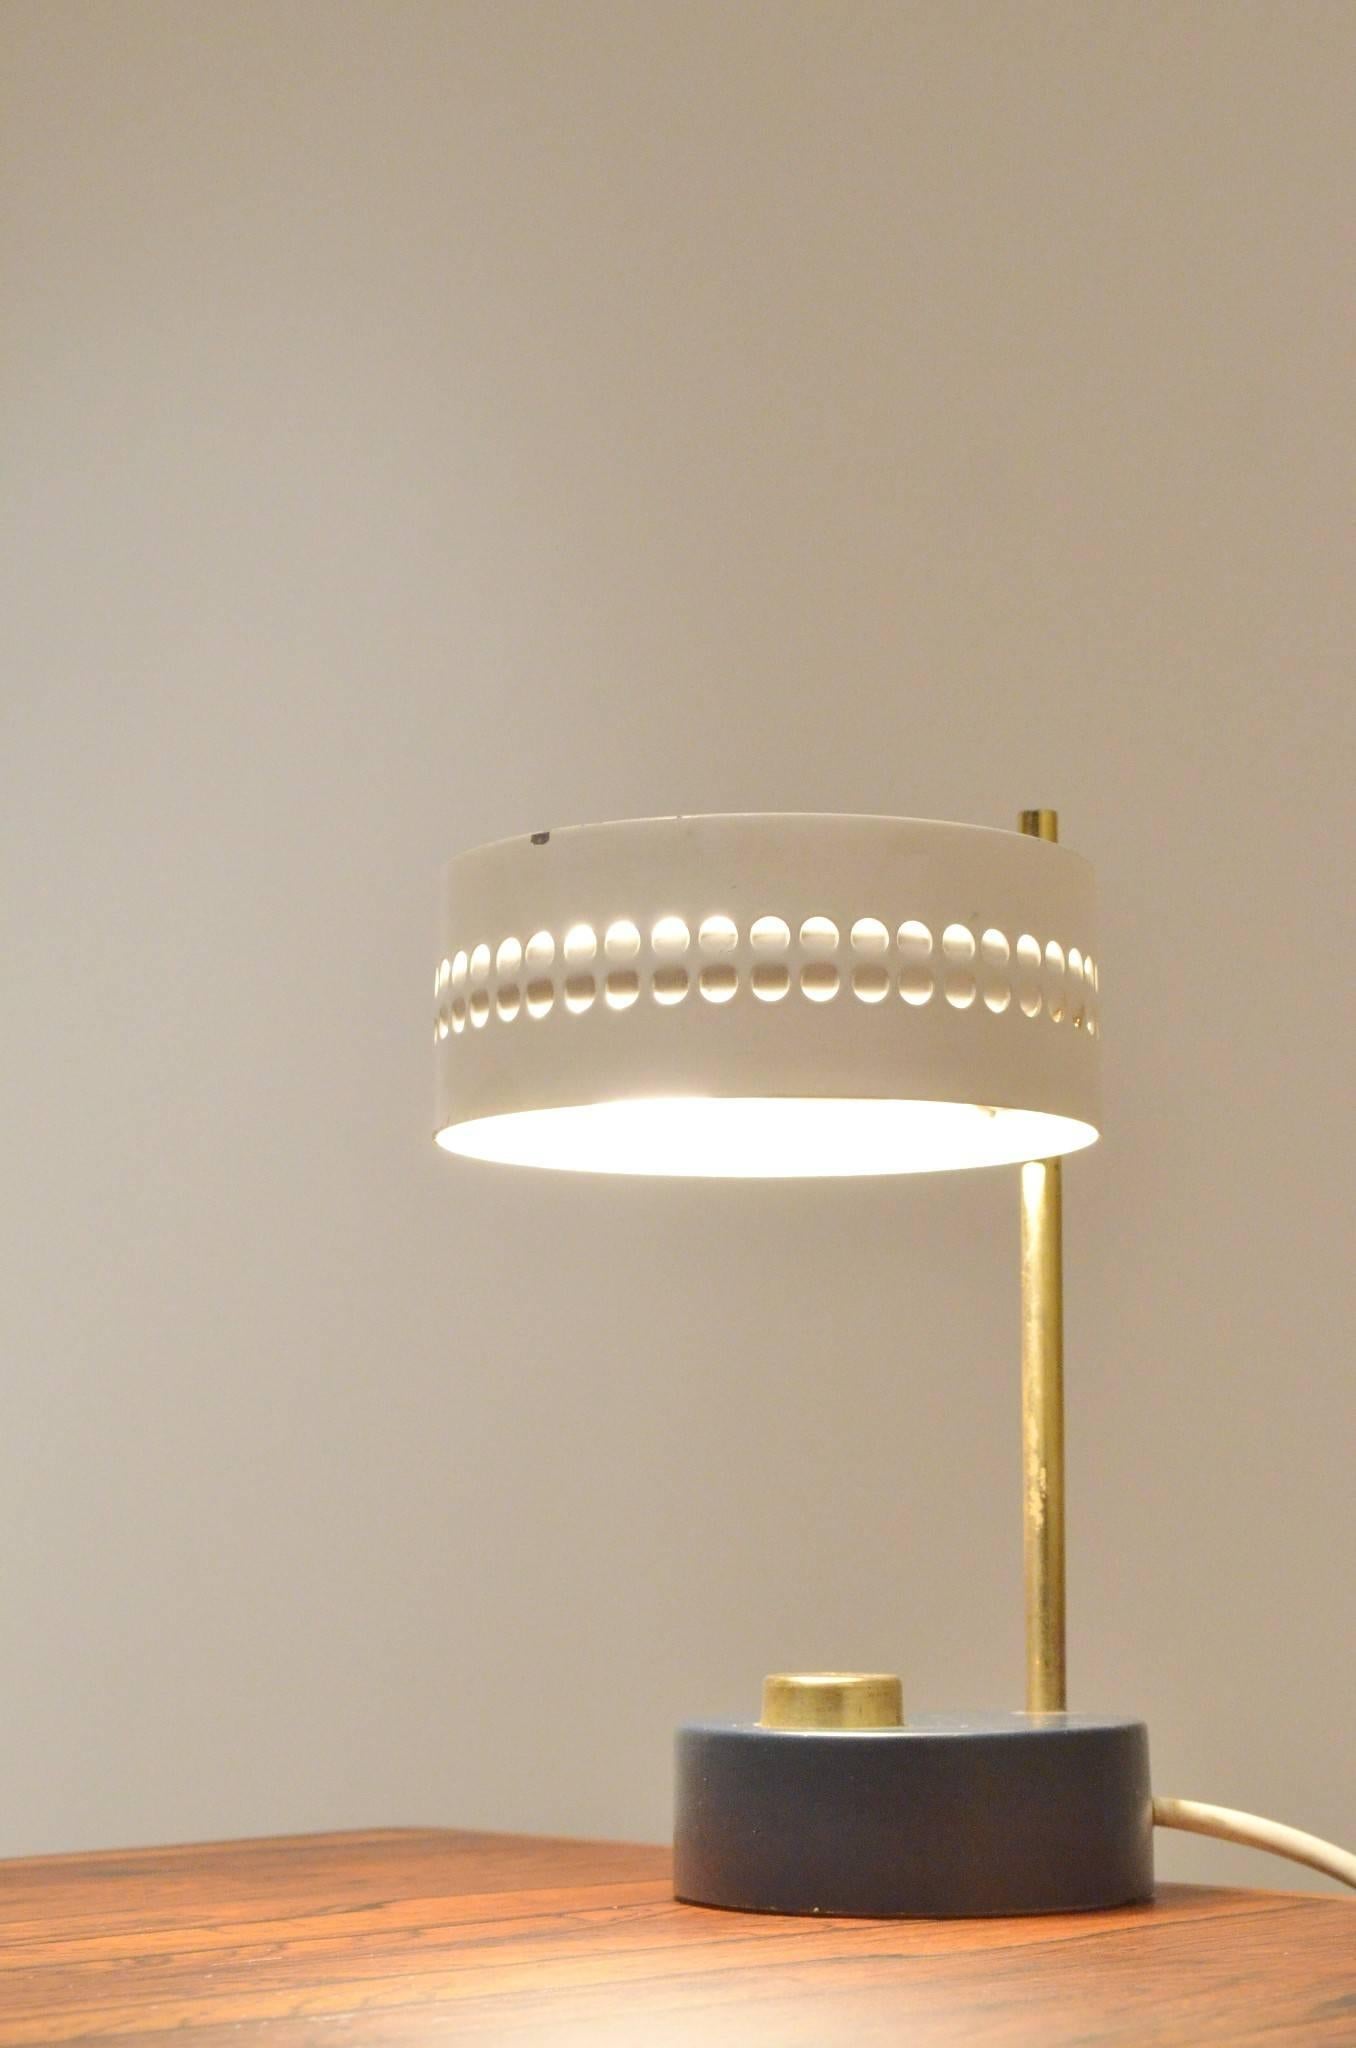 Small Bicolored and Perforated Metal Table Lamp Attributed to Mathieu Matégot (Mitte des 20. Jahrhunderts) im Angebot